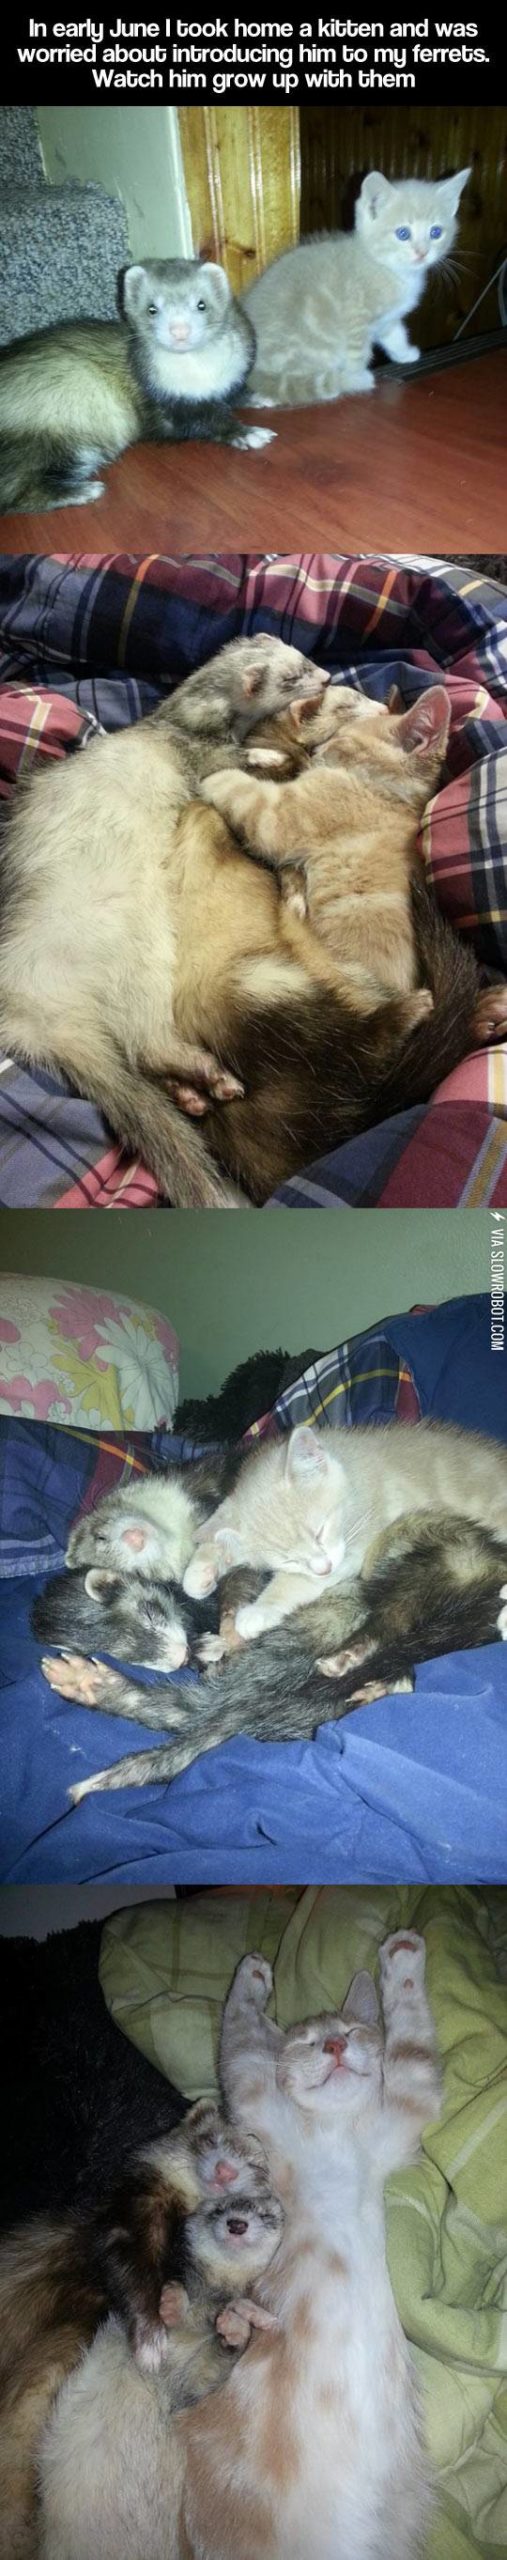 Ferrets+and+a+kitten.